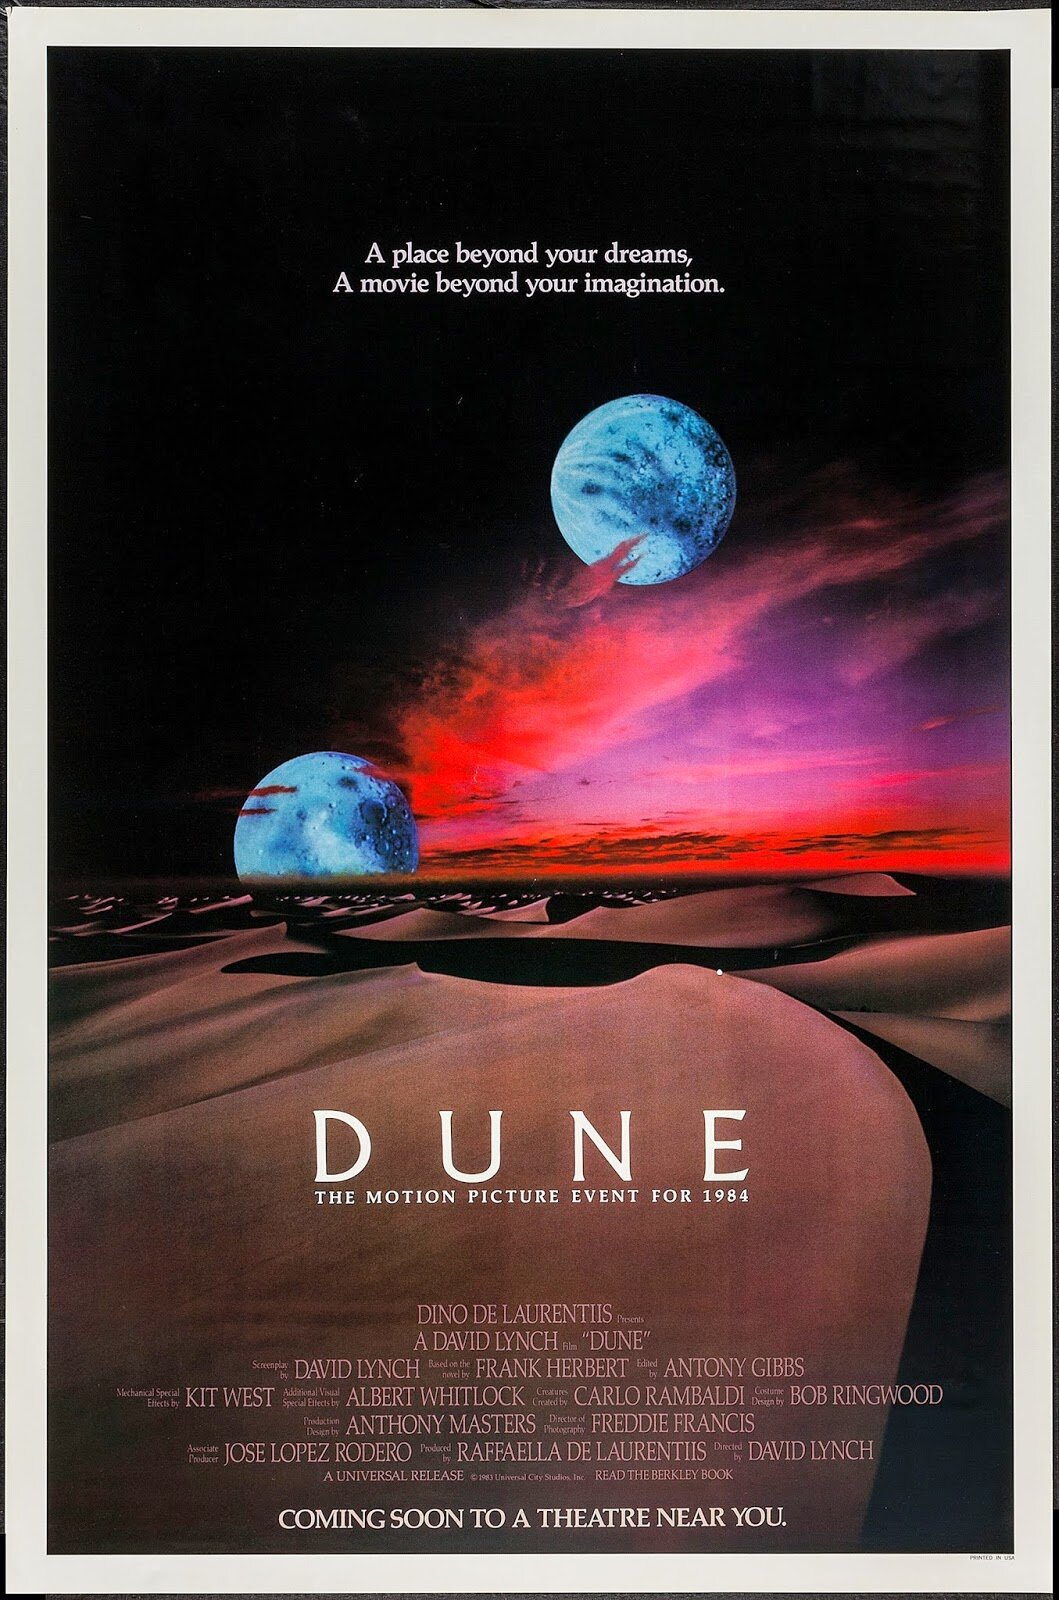 The original poster for David Lynch's 1984 Dune .